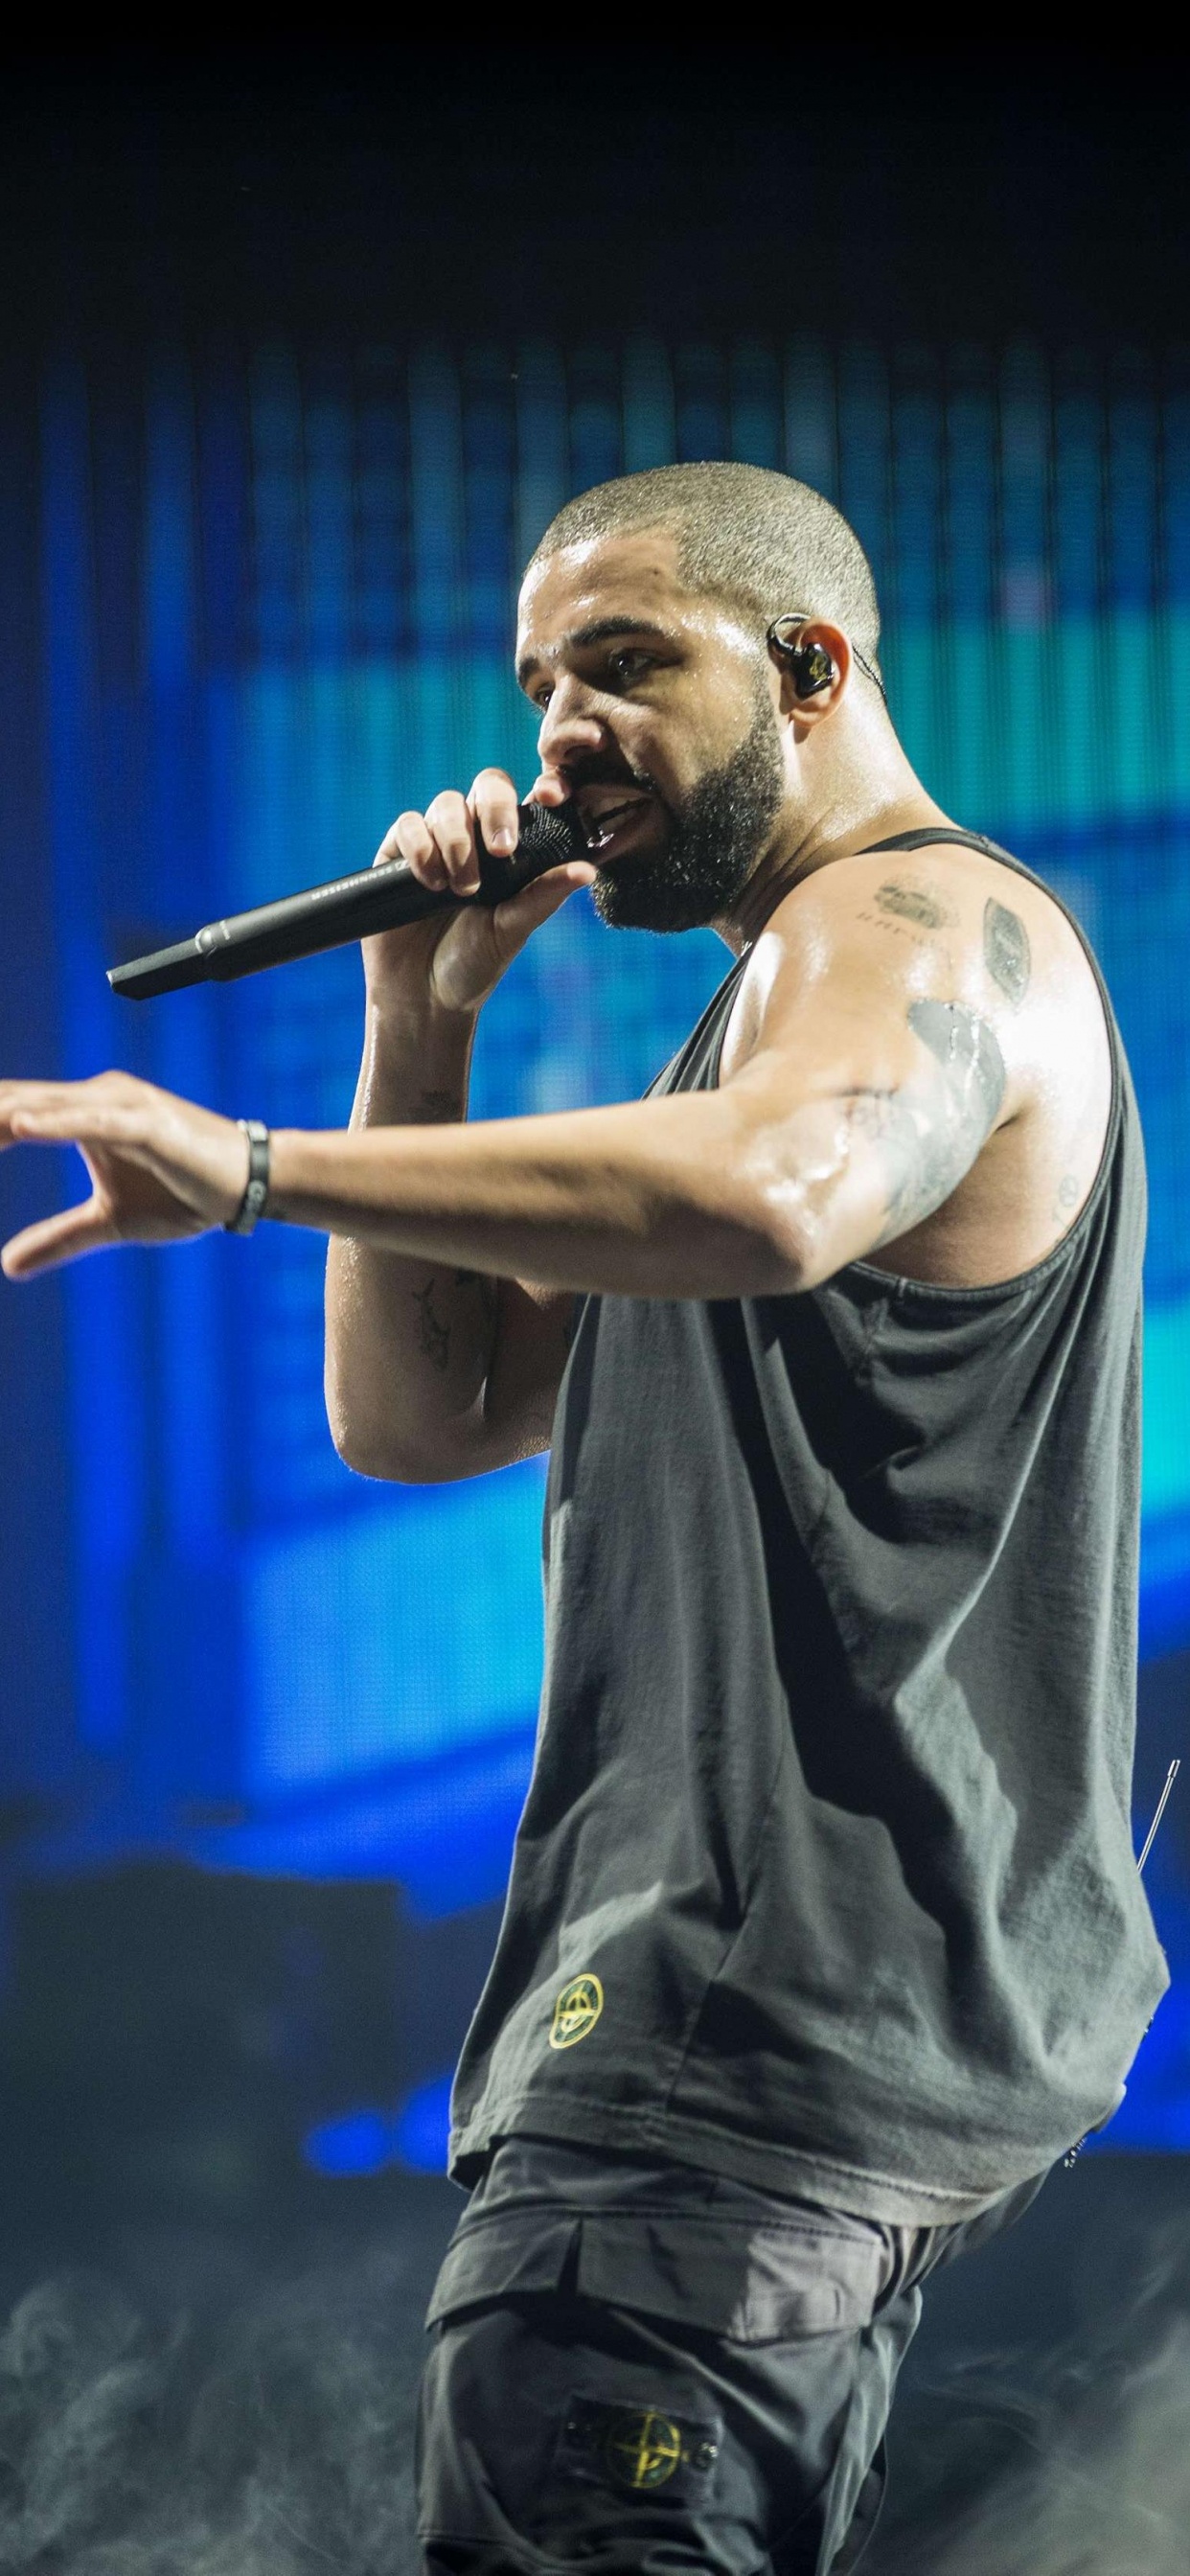 Drake Live, Rapper, Aubrey The Three Migos Tour, More Life, Concert. Wallpaper in 1242x2688 Resolution